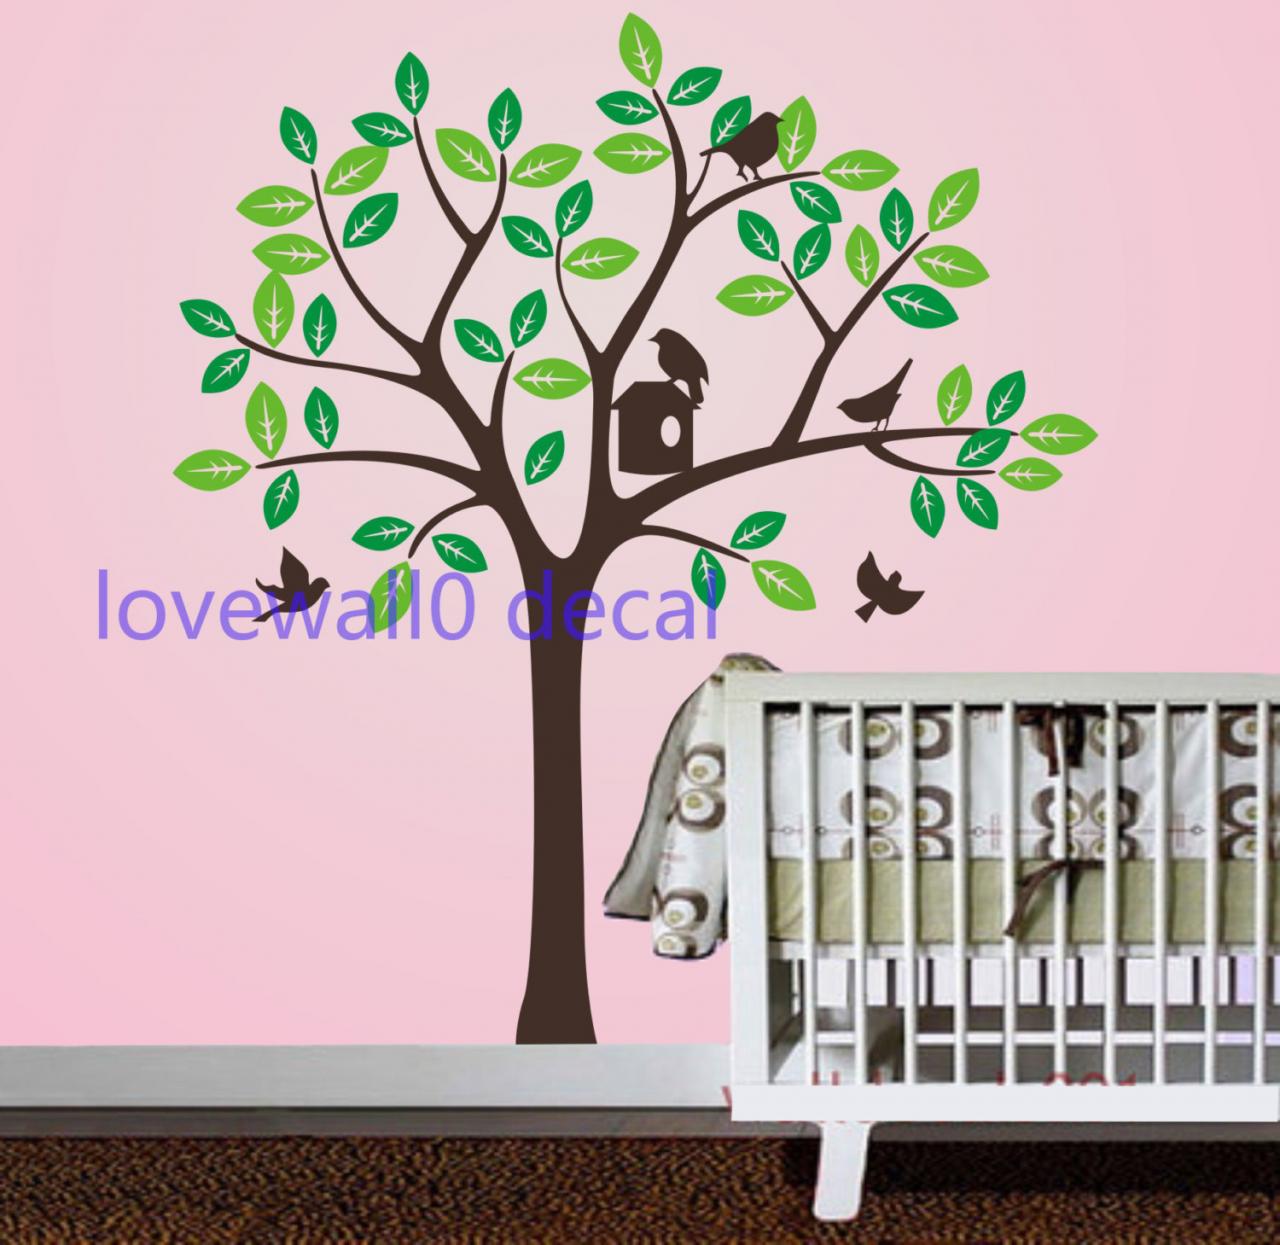 Two Set Leaves Tree With Bird Birdhouse Birds Leaf Room House Wall Sticker Art Murals Stickers Decal Decor Removeable 6613